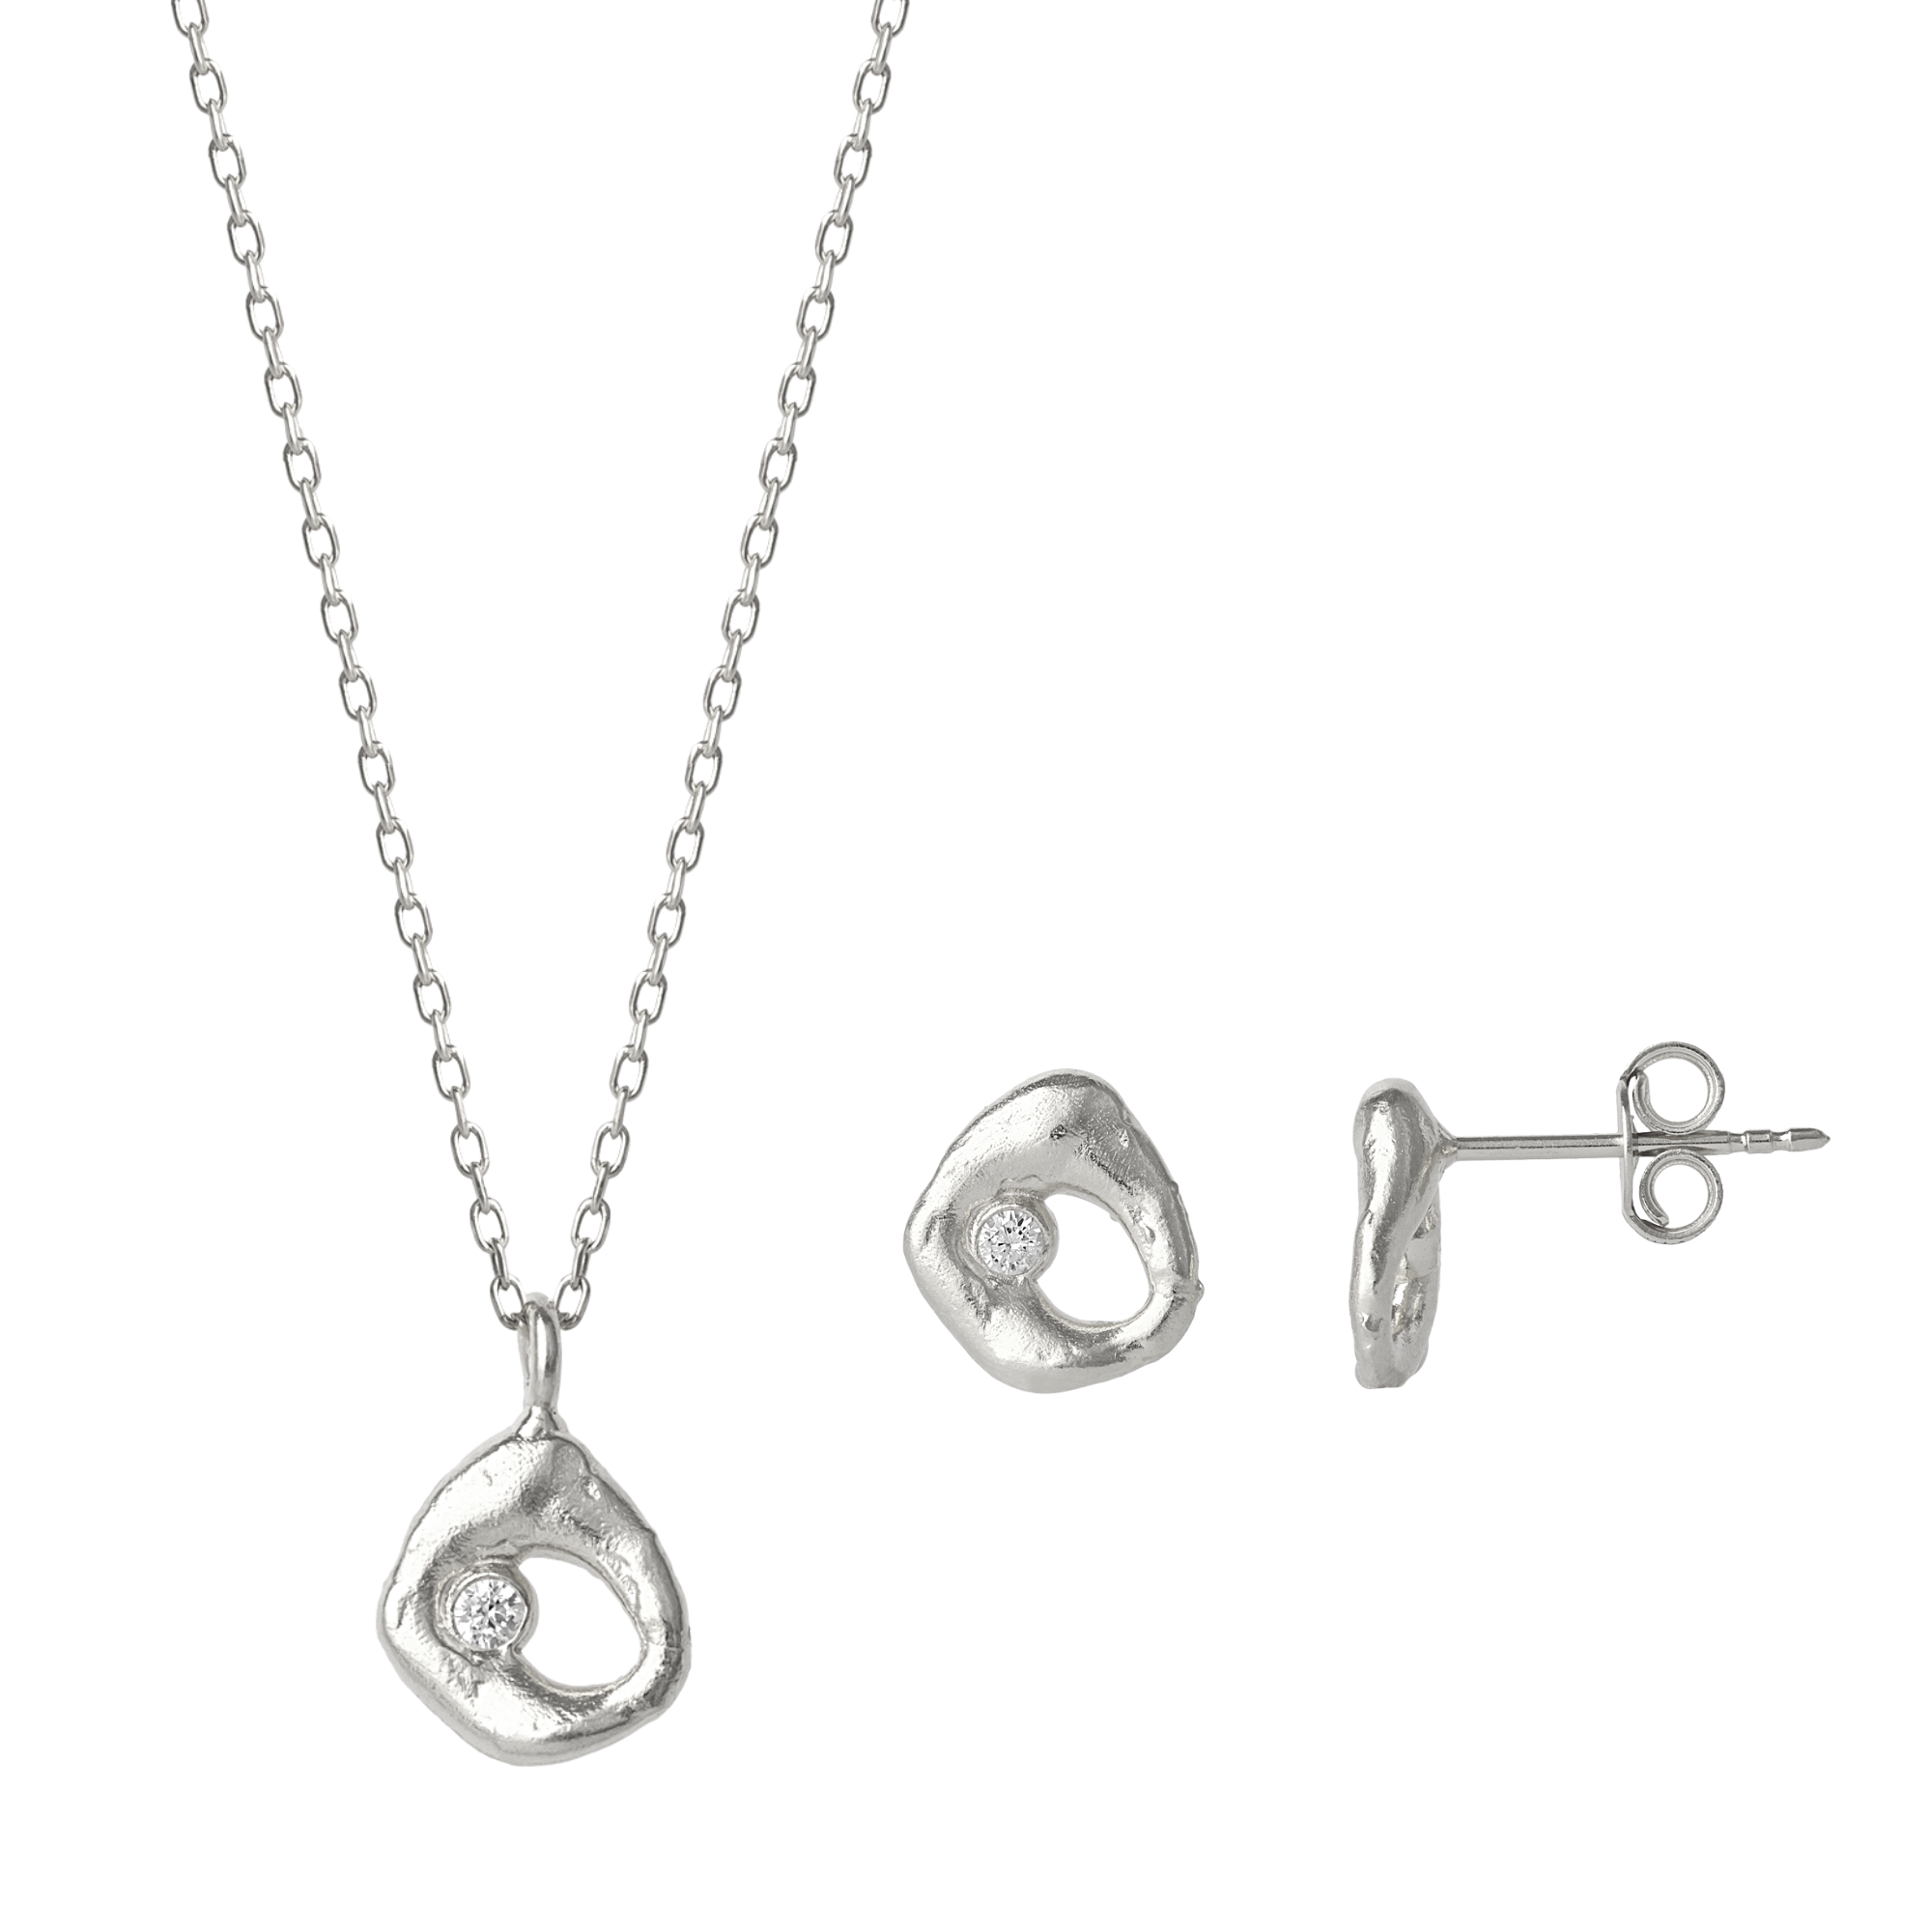 Dripping Molten Natural Textured Sterling Silver Authentic Pendant Necklace and Earring Set